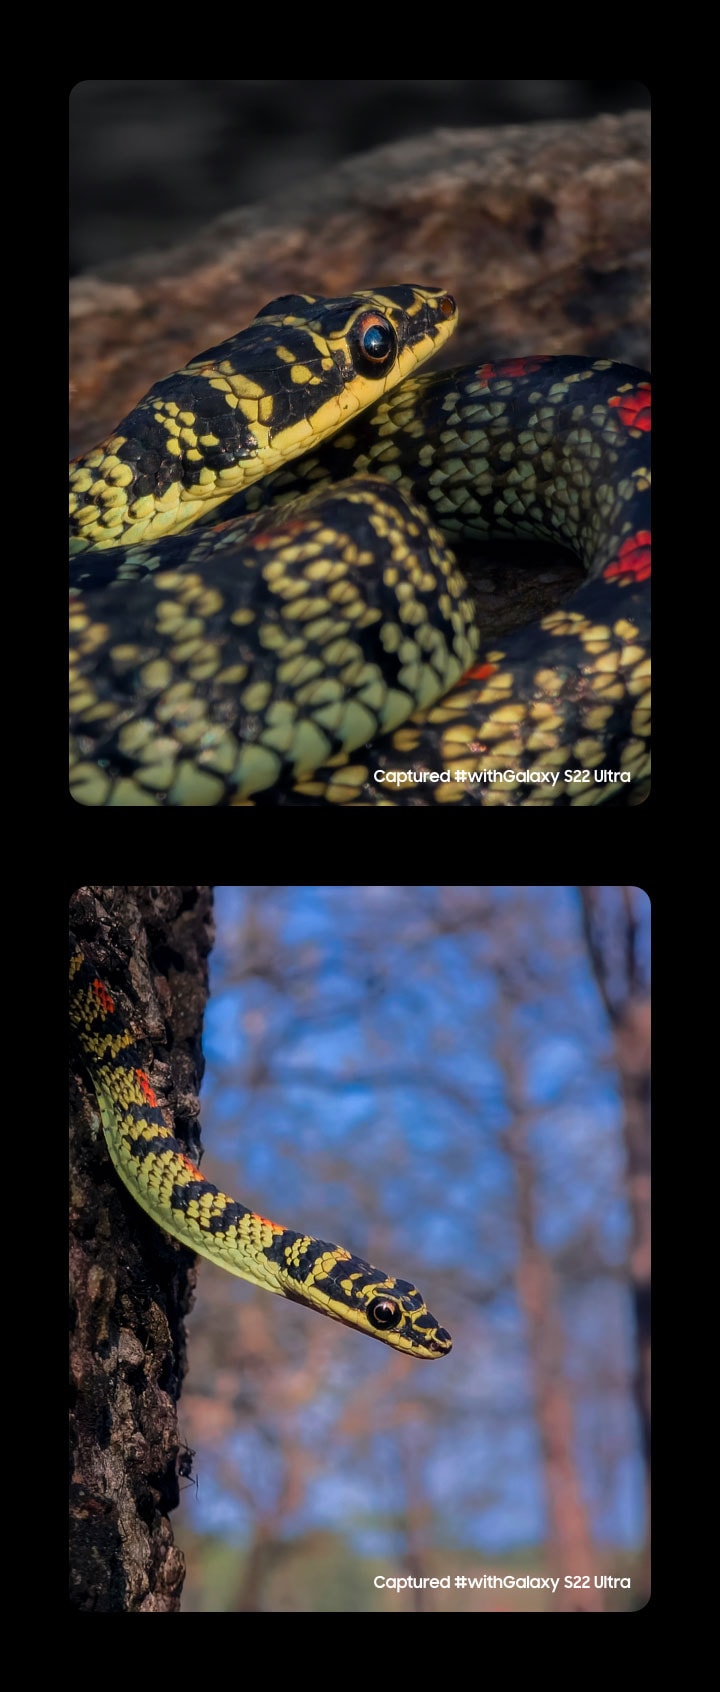 Two side-by-side snapshots of a snake taken with the Galaxy S22 Ultra. Captured #withGalaxy S22 Ultra